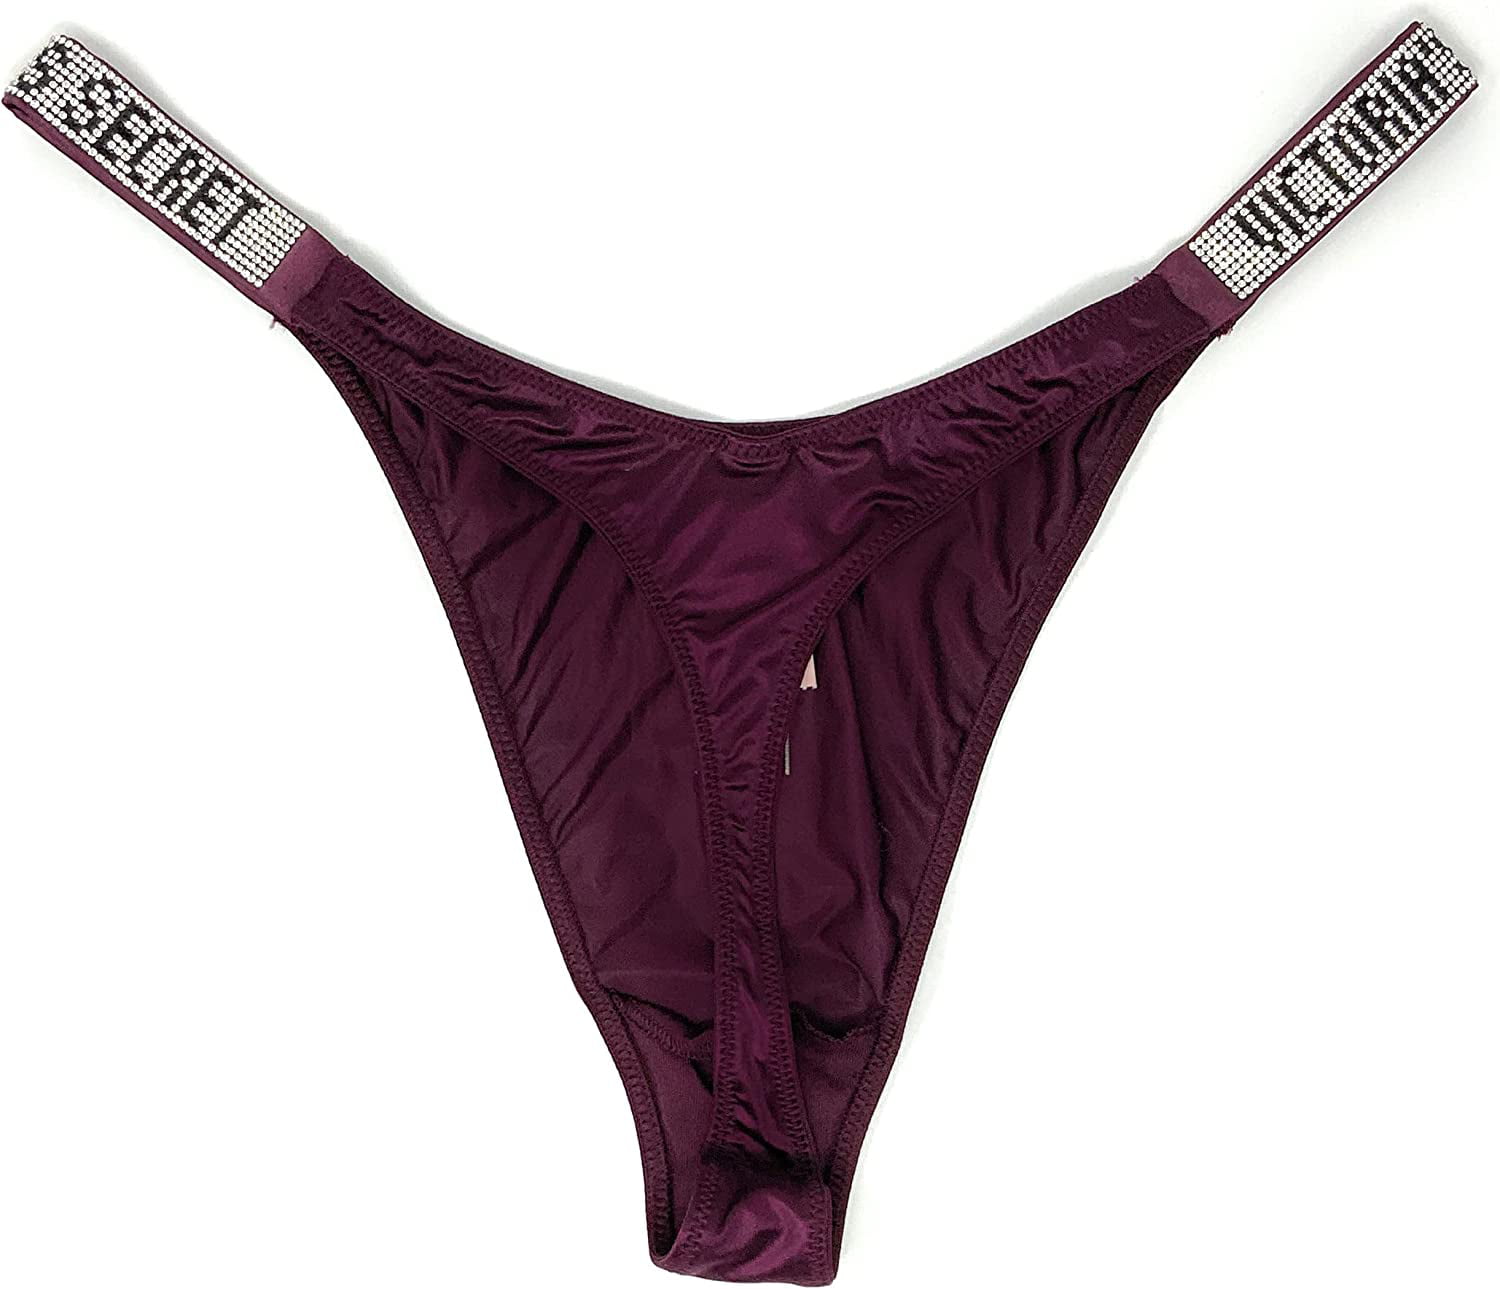 Victoria's Secret Very Sexy Bombshell Shine Thong for Women Maroon